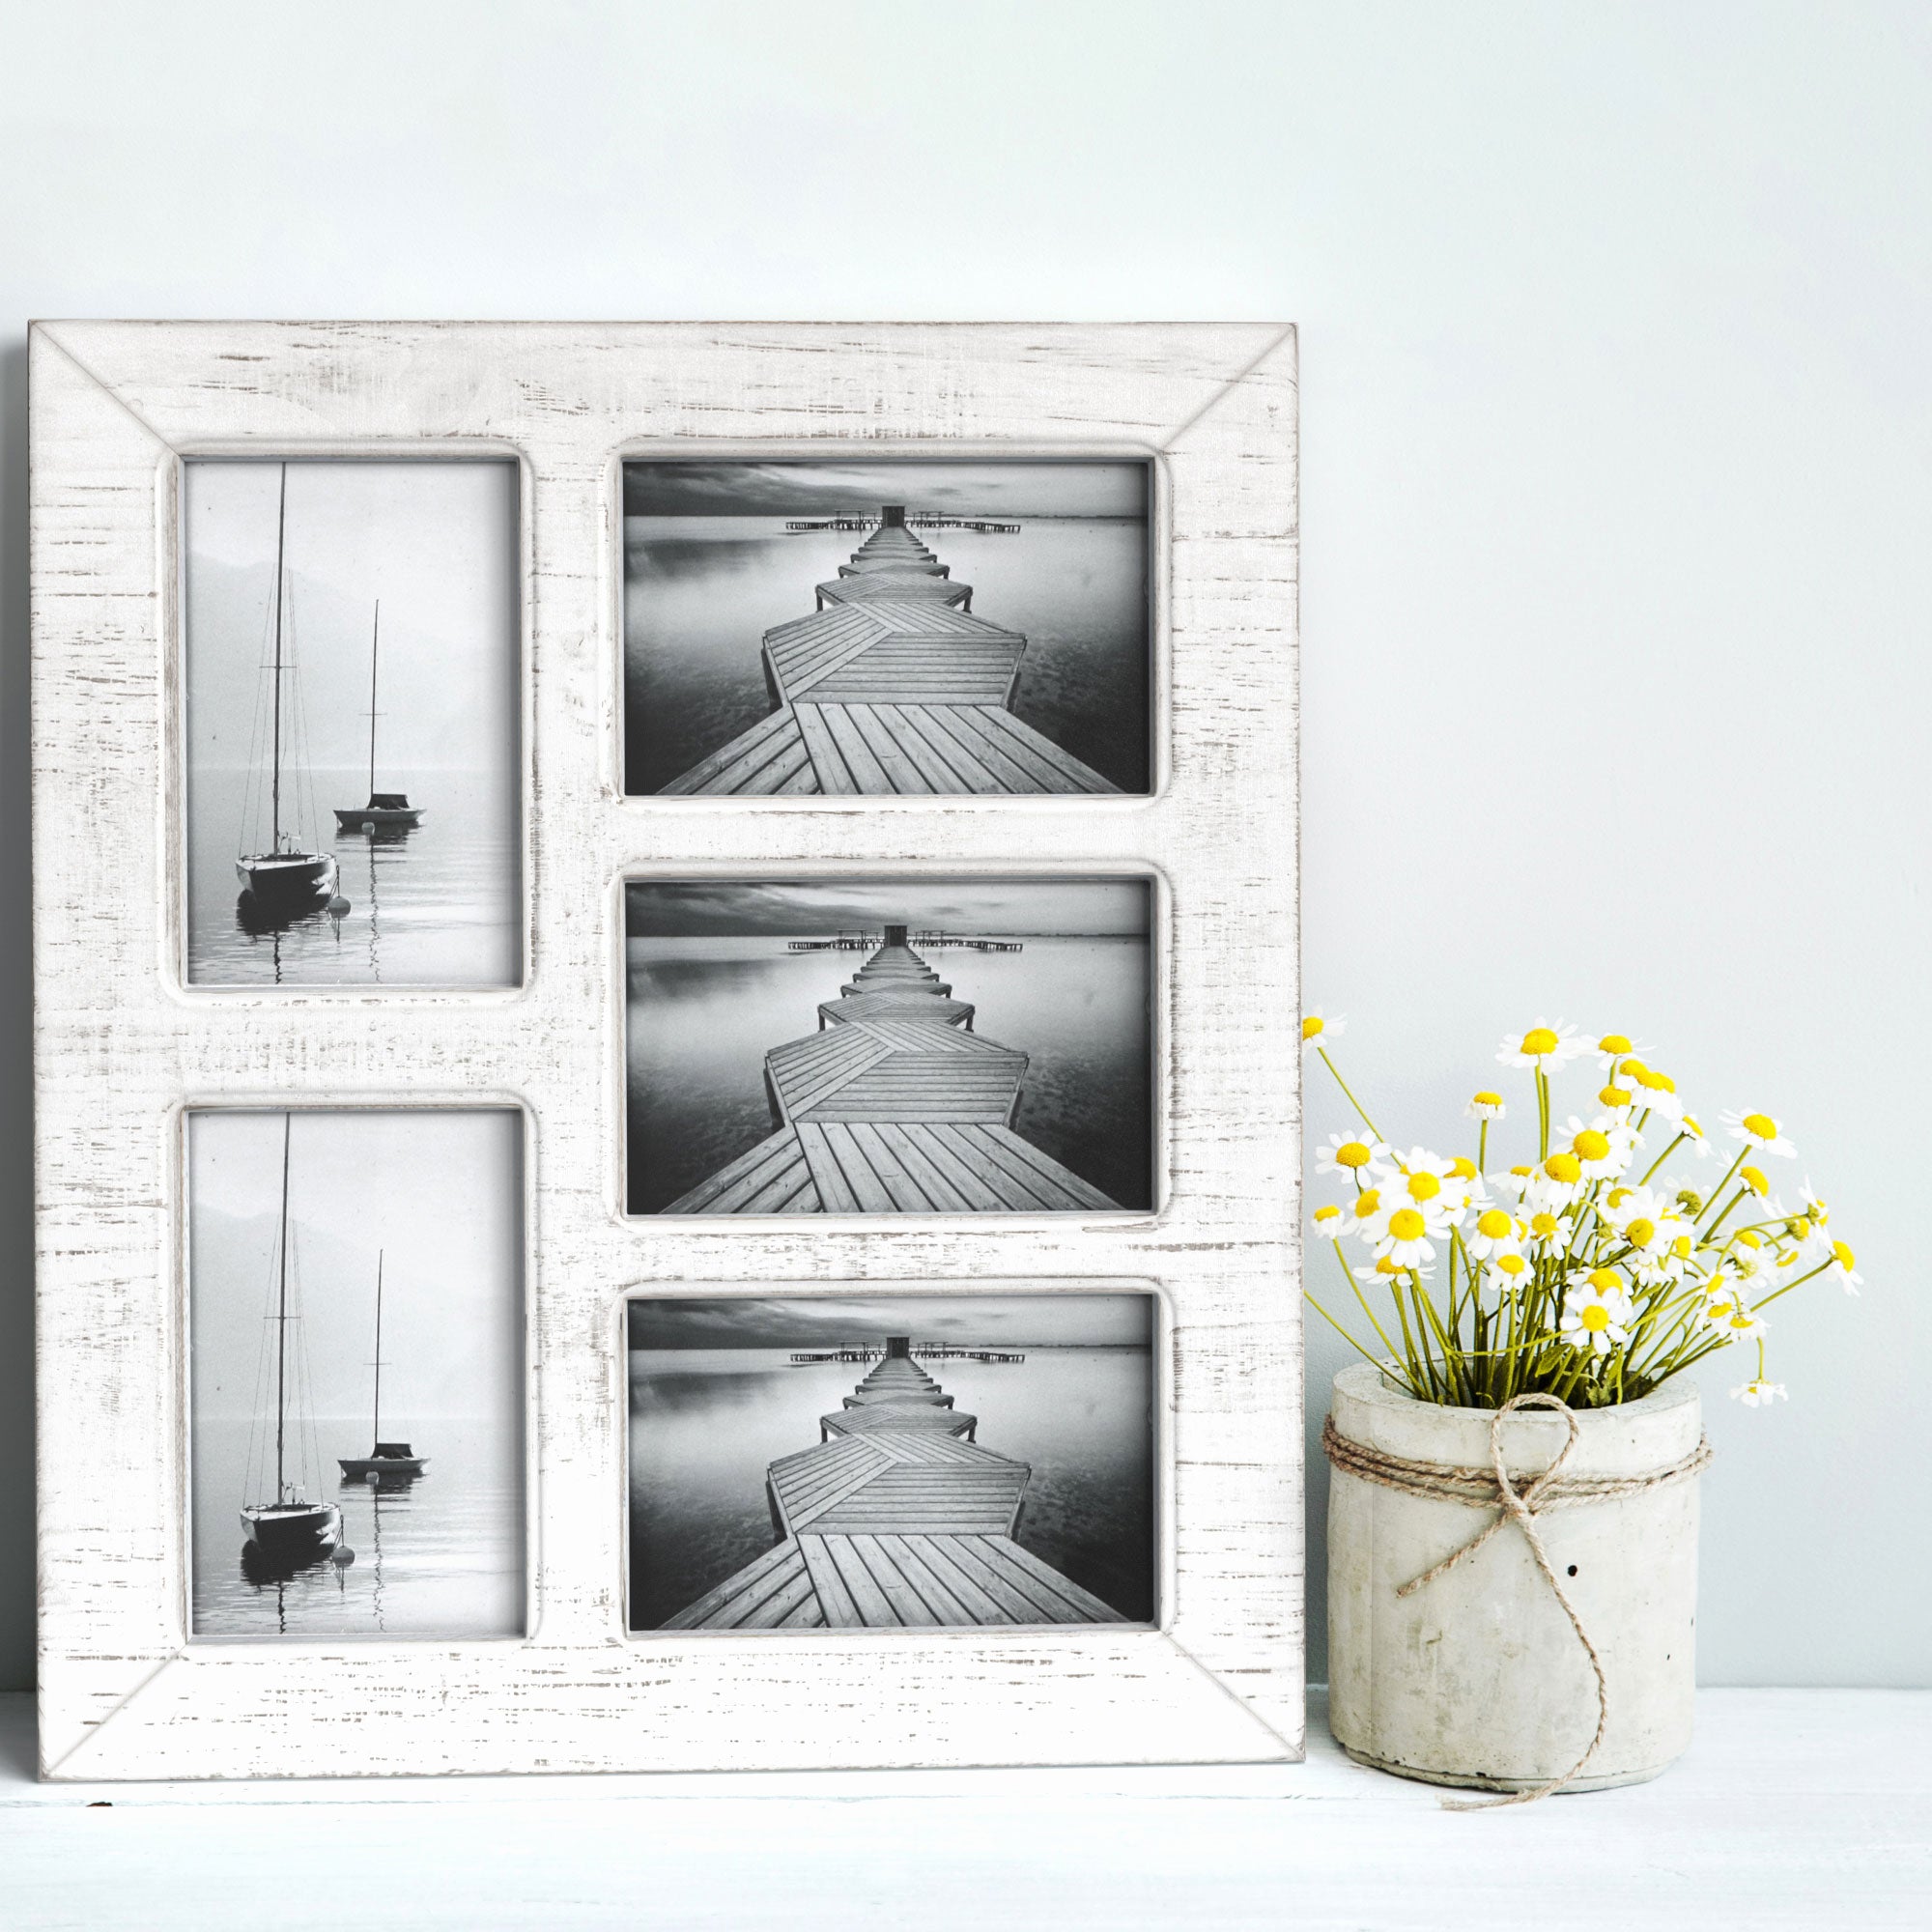 Langdon House 4x6 Picture Frames (Distressed White, 6 Pack) Farmhouse Style, Richland Collection